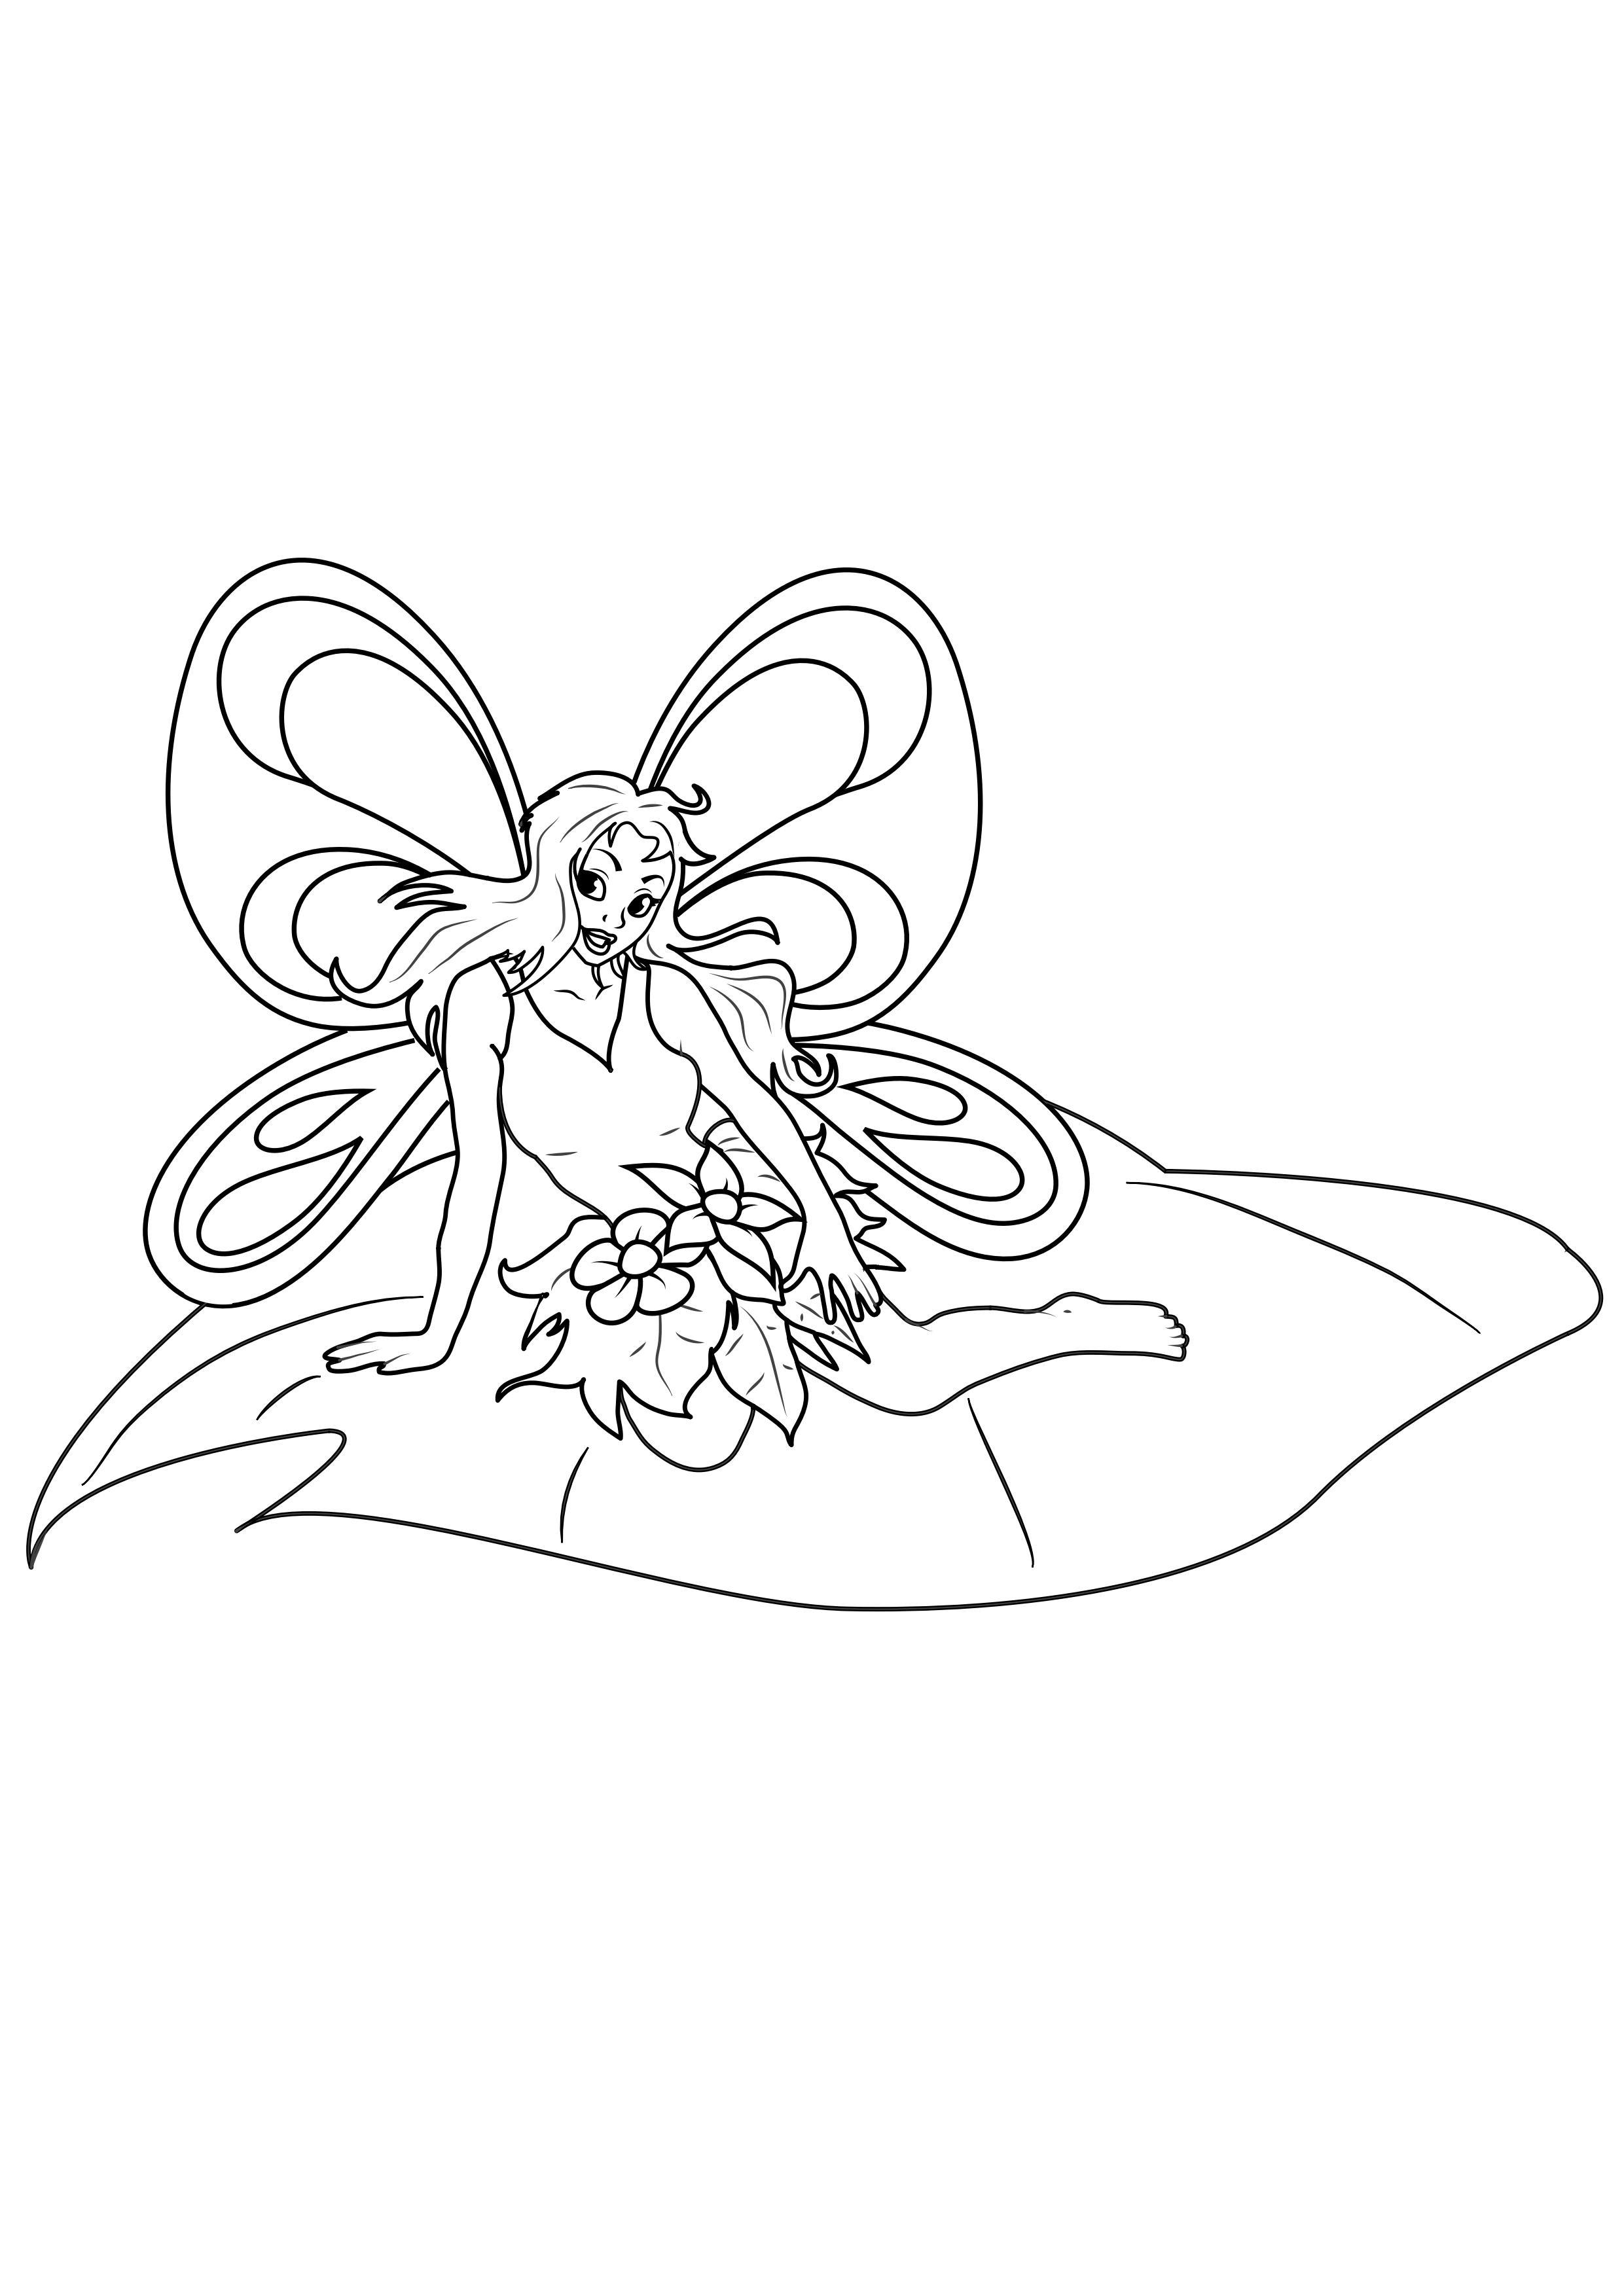 Coloring page fairy on leaf